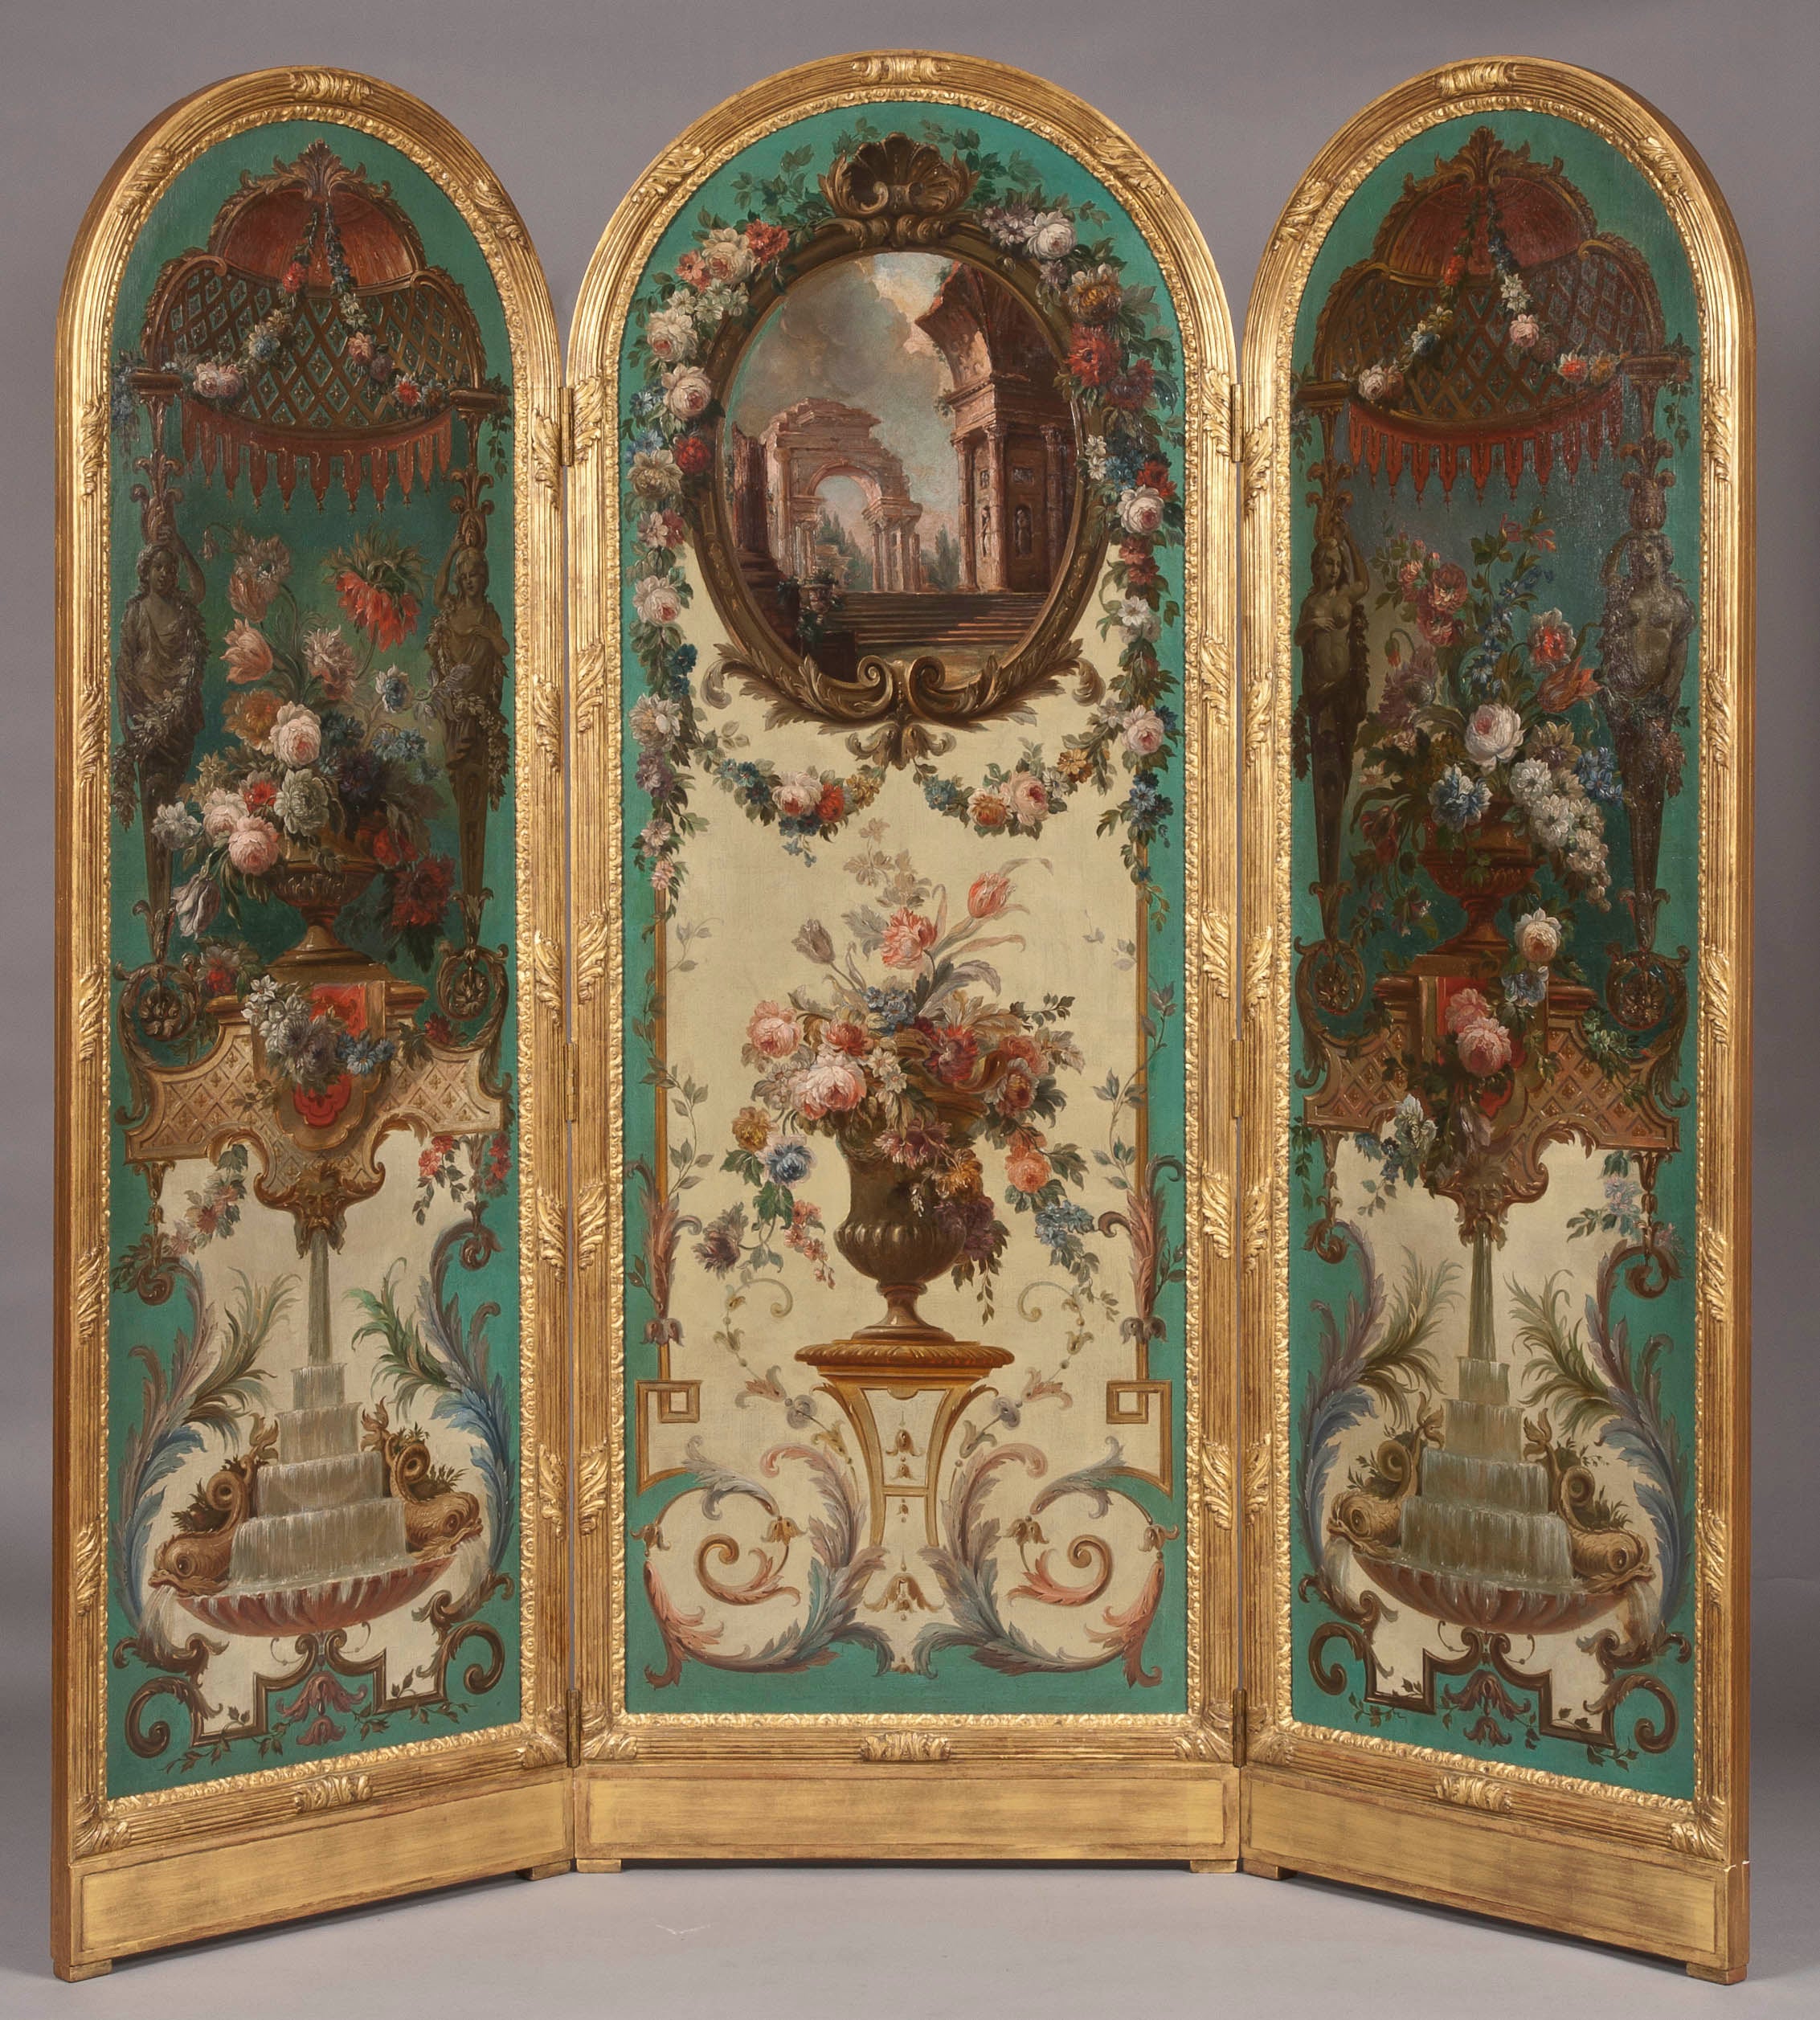 A Highly Decorative Antique Screen in the Classic Manner